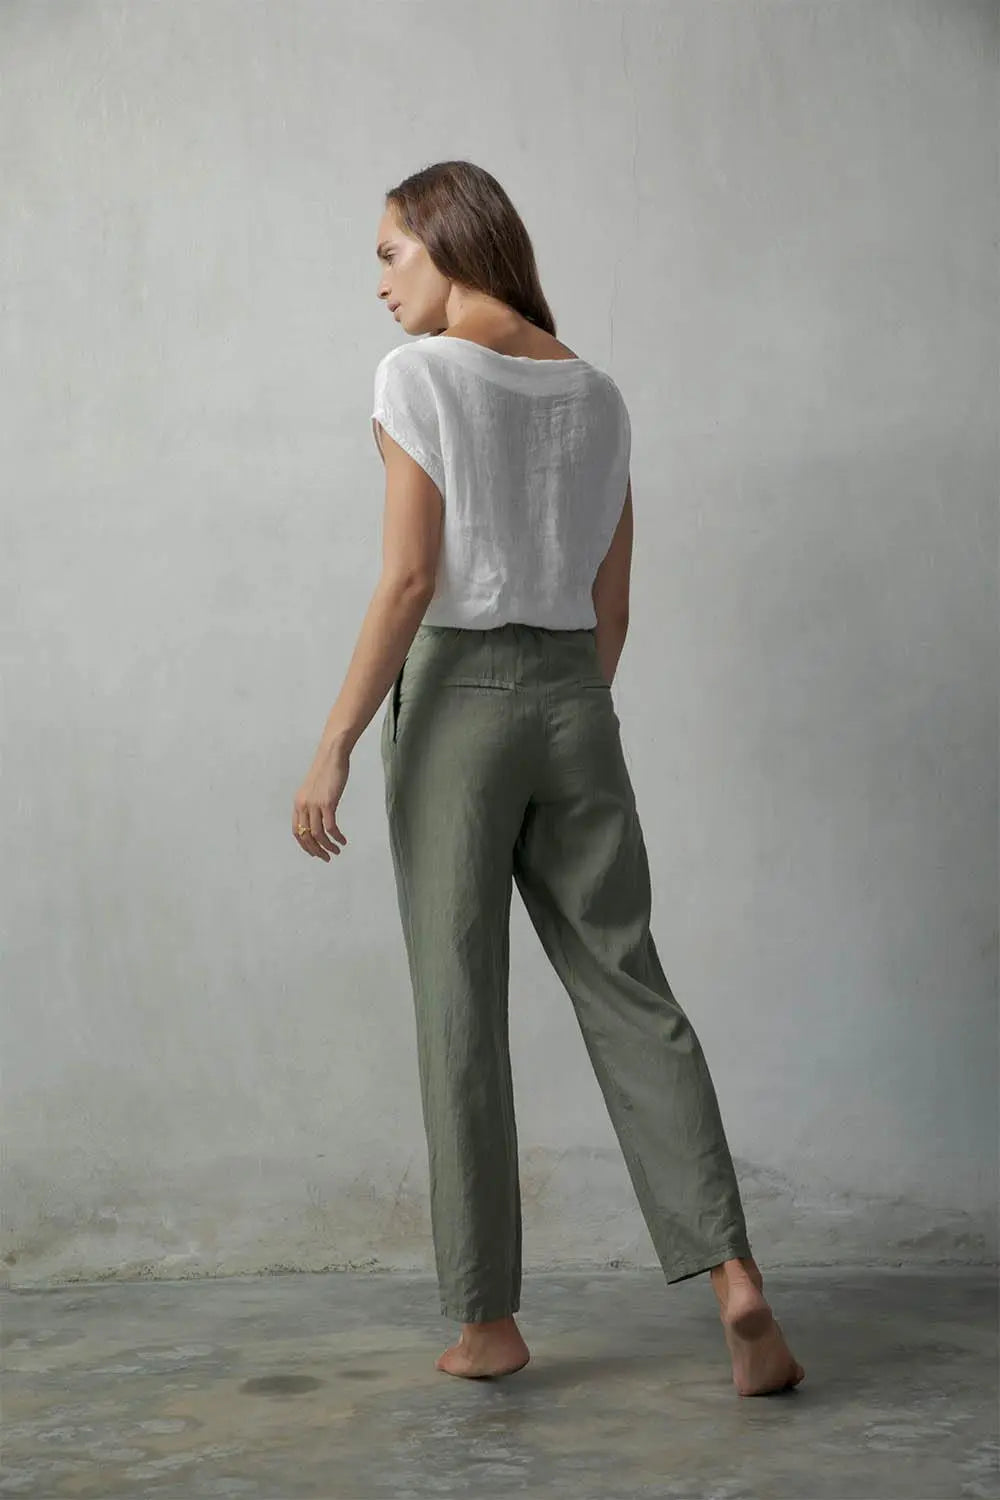 Buy Linen Trousers For Women in India @ Limeroad